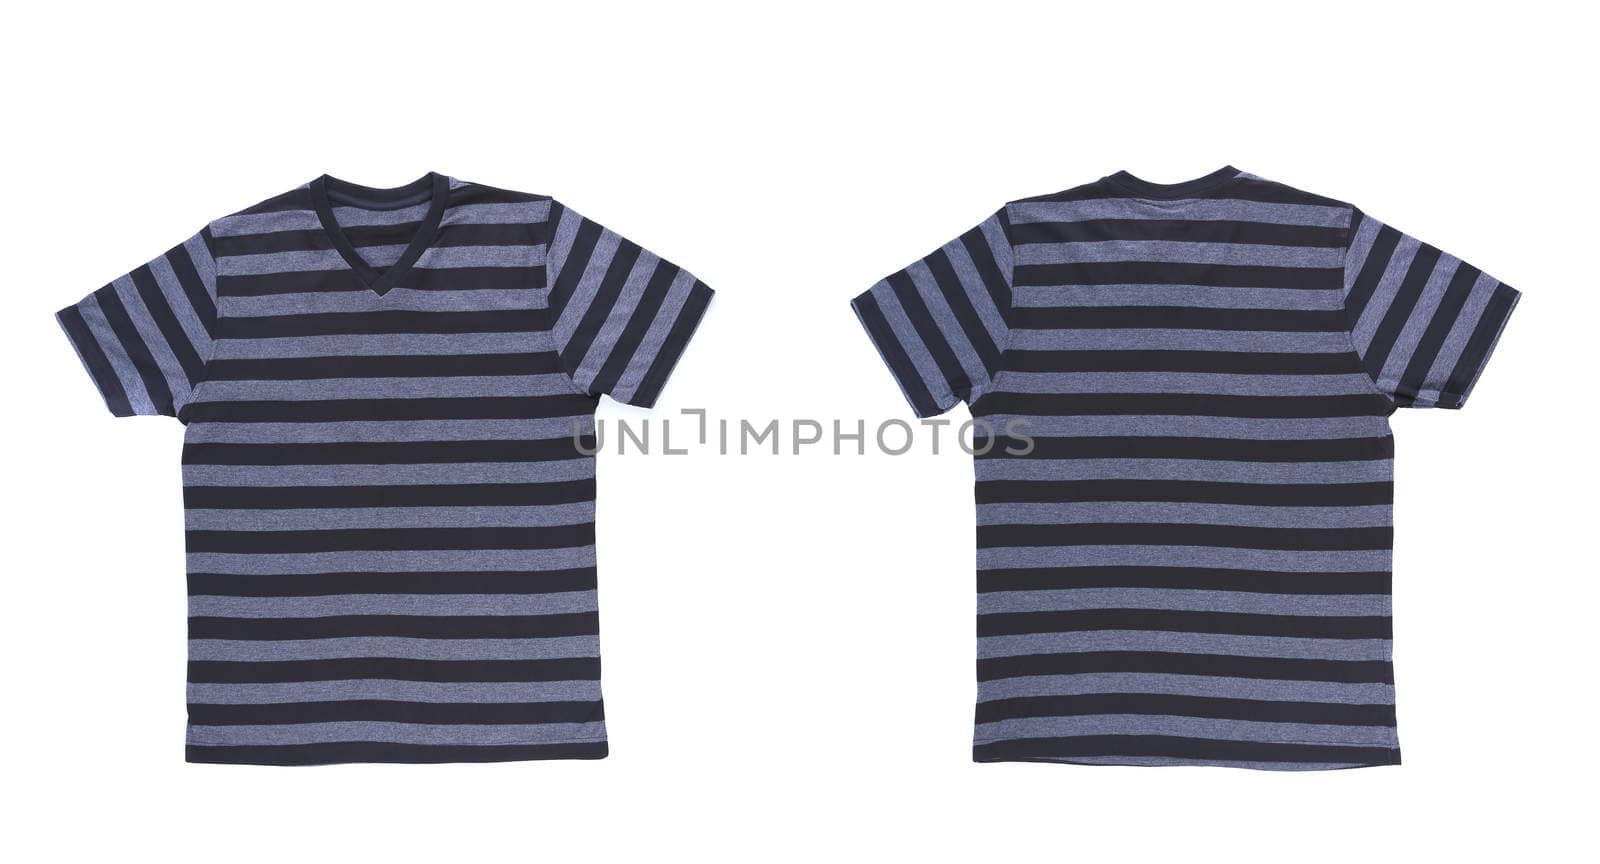 Men's striped T-shirt with clipping path by indigolotos